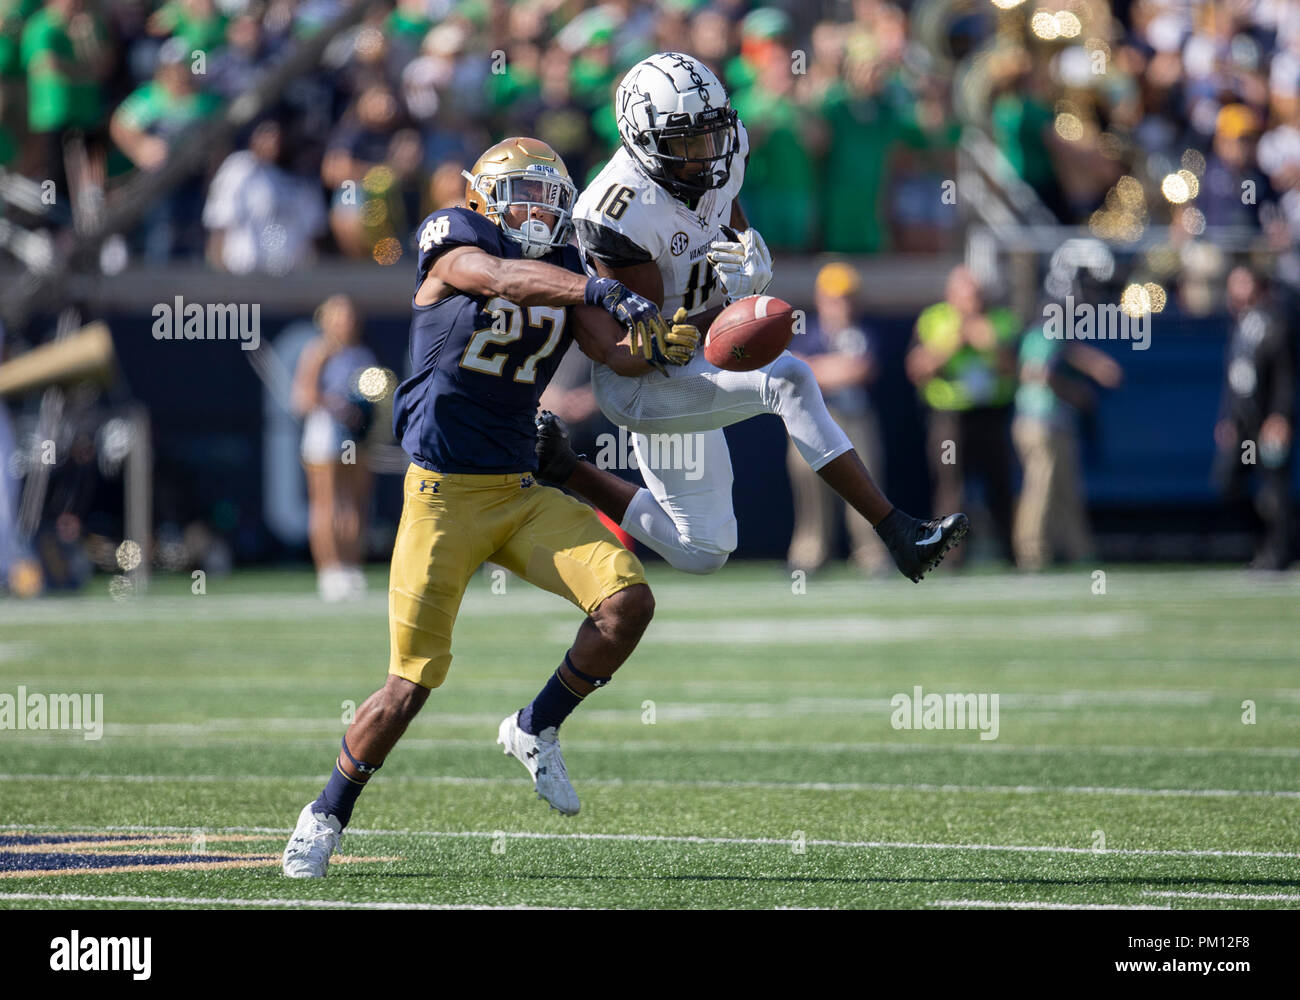 South Bend, Indiana, USA. 15th Sep, 2018. Notre Dame defensive back Julian Love (27) breaks up pass intended for Vanderbilt wide receiver Kalija Lipscomb (16) during NCAA football game action between the Vanderbilt Commodores and the Notre Dame Fighting Irish at Notre Dame Stadium in South Bend, Indiana. Notre Dame defeated Vanderbilt 22-17. John Mersits/CSM/Alamy Live News Stock Photo